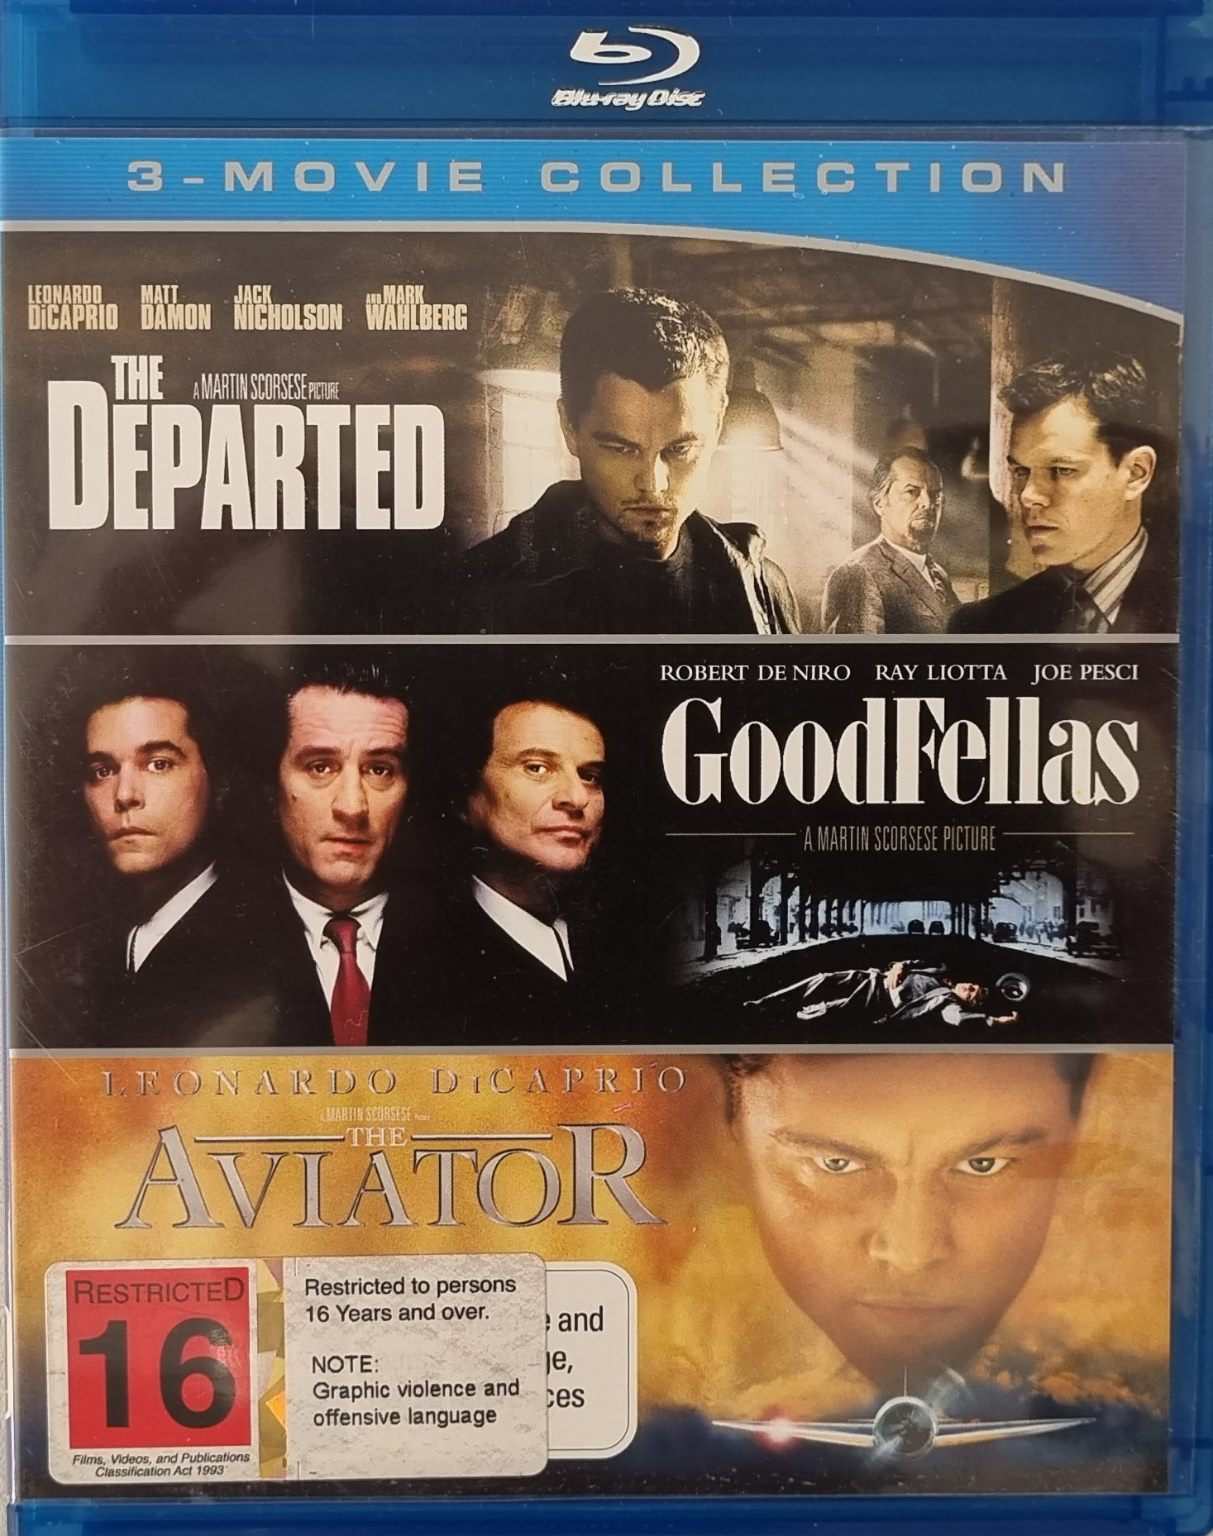 The Departed / Goodfellas / The Aviator (Blu Ray)